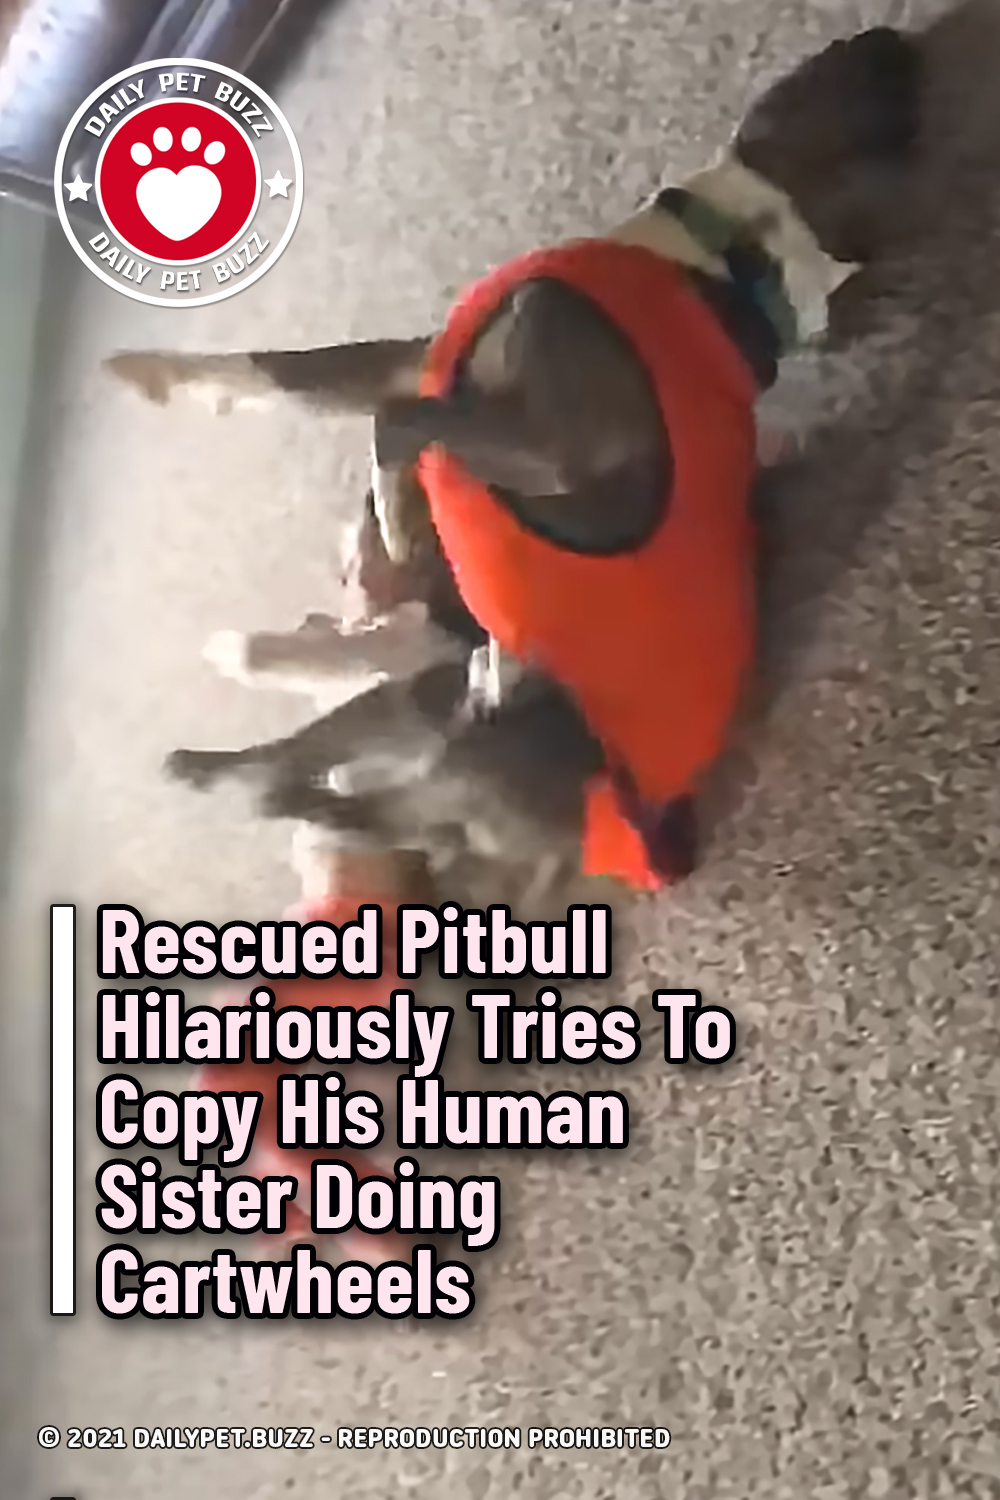 Rescued Pitbull Hilariously Tries To Copy His Human Sister Doing Cartwheels